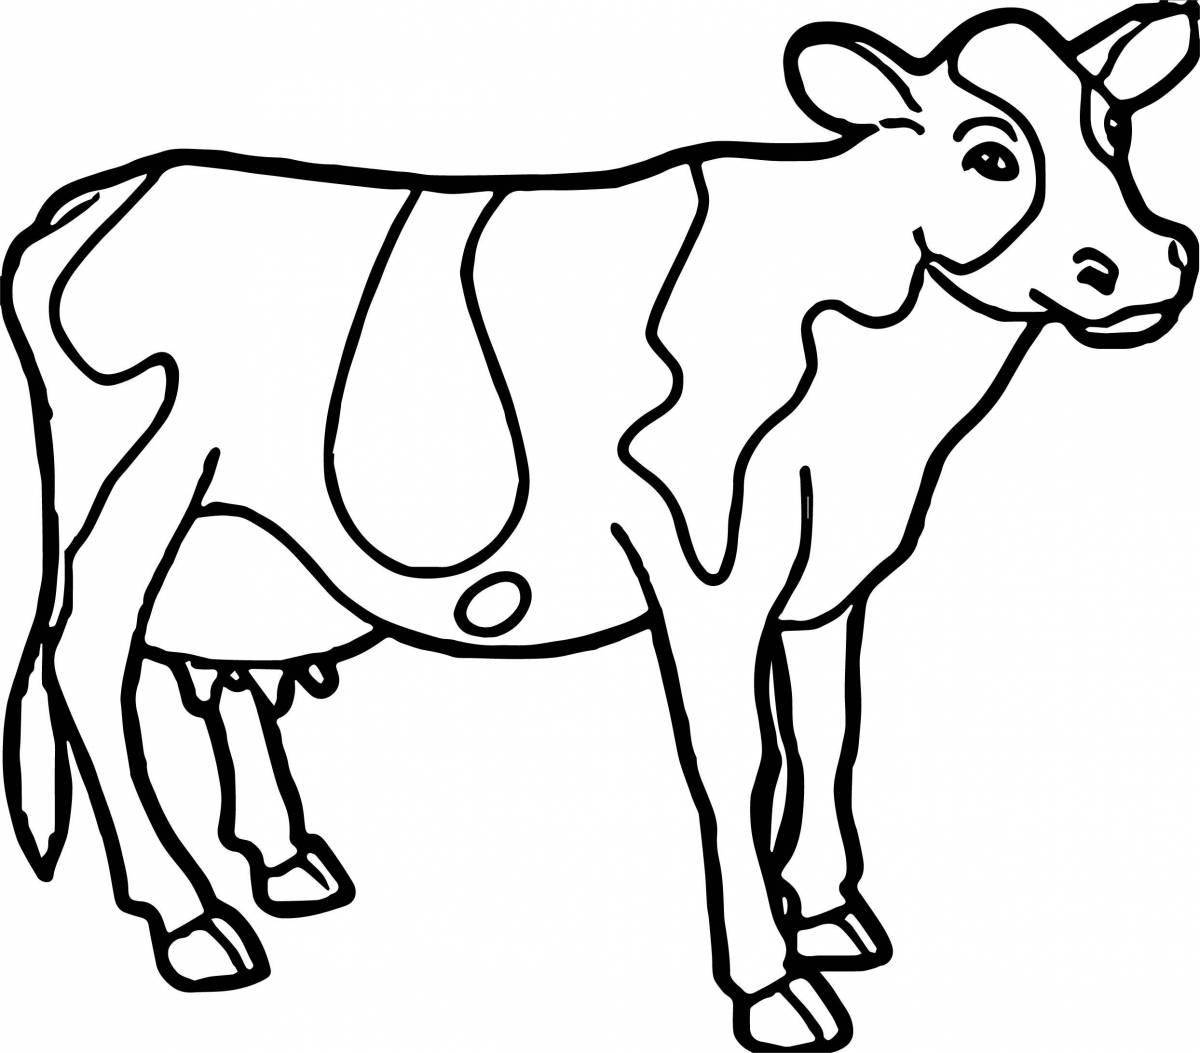 Gorgeous Cow Coloring Page for Toddlers